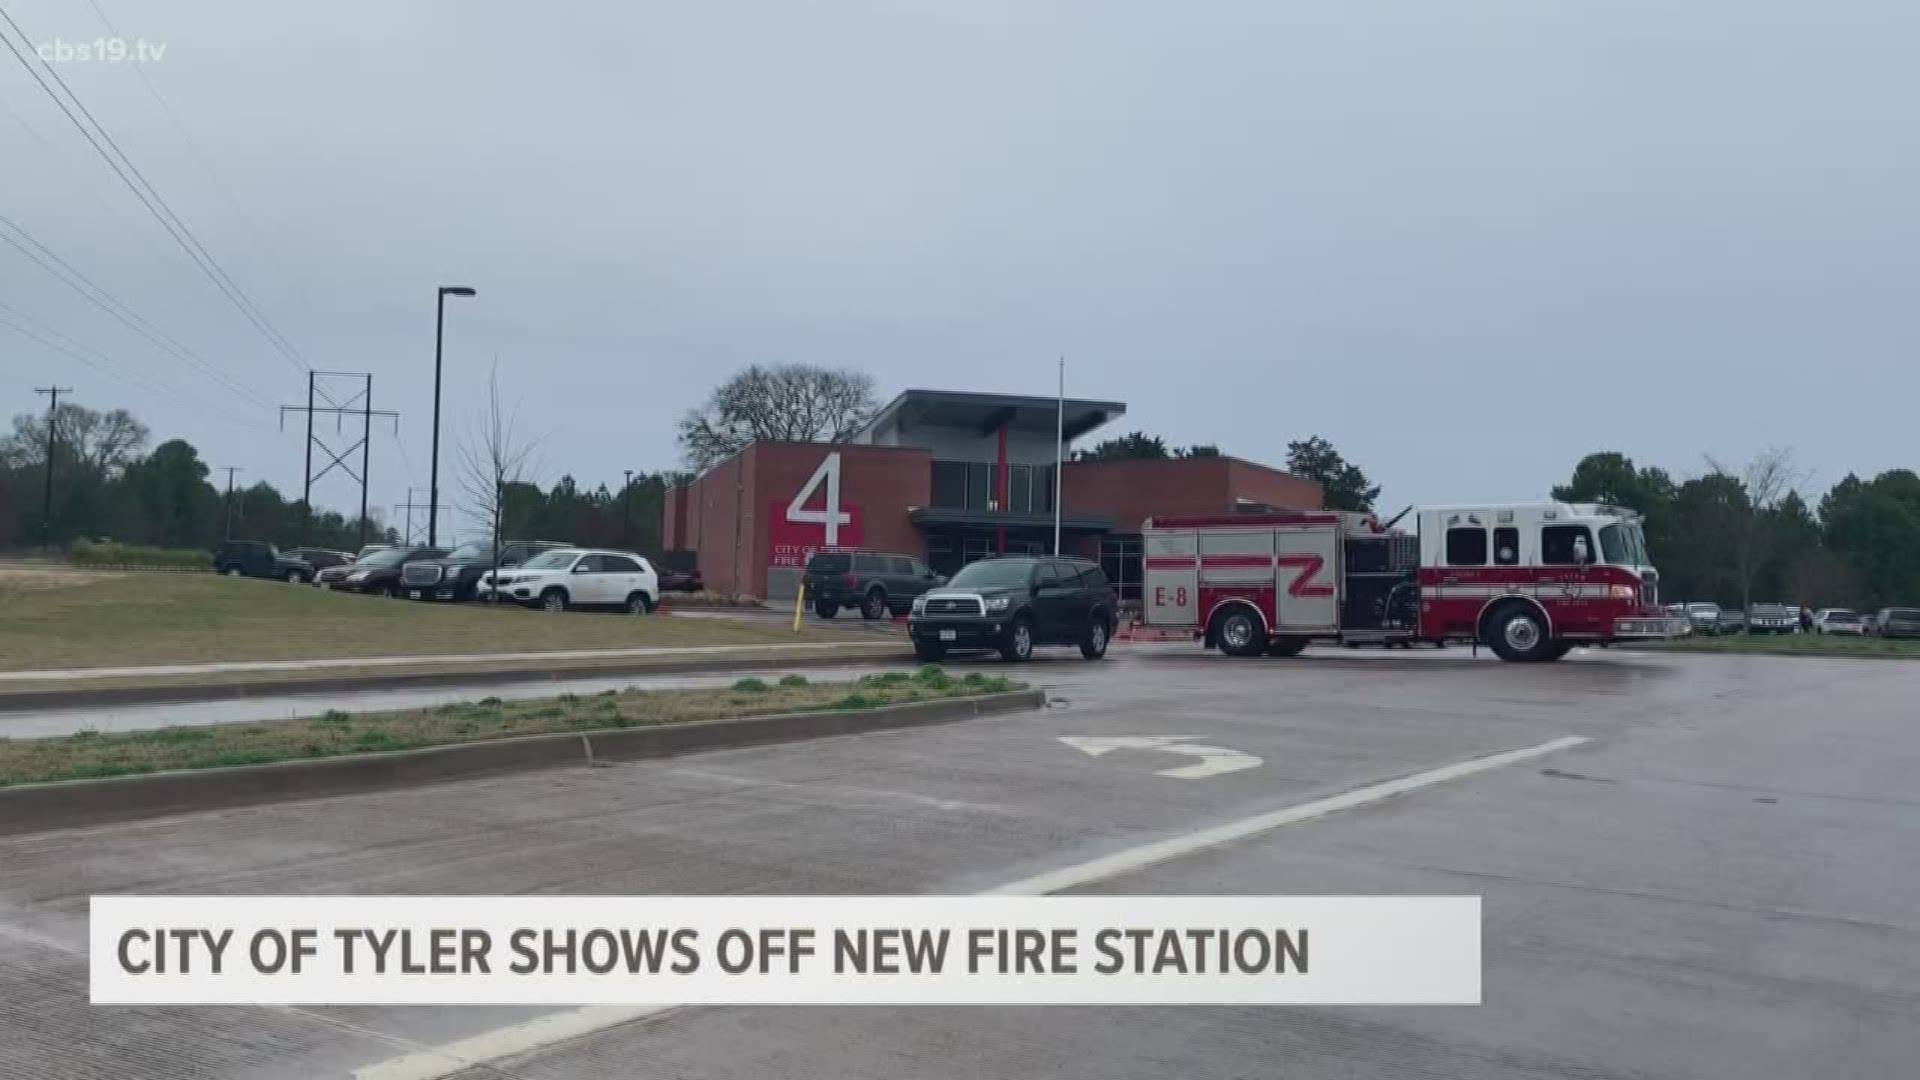 It's nicknamed the neighborhood fire station. And it opened its doors today for people to come and look at Tyler's newest upgrade to the fire system.